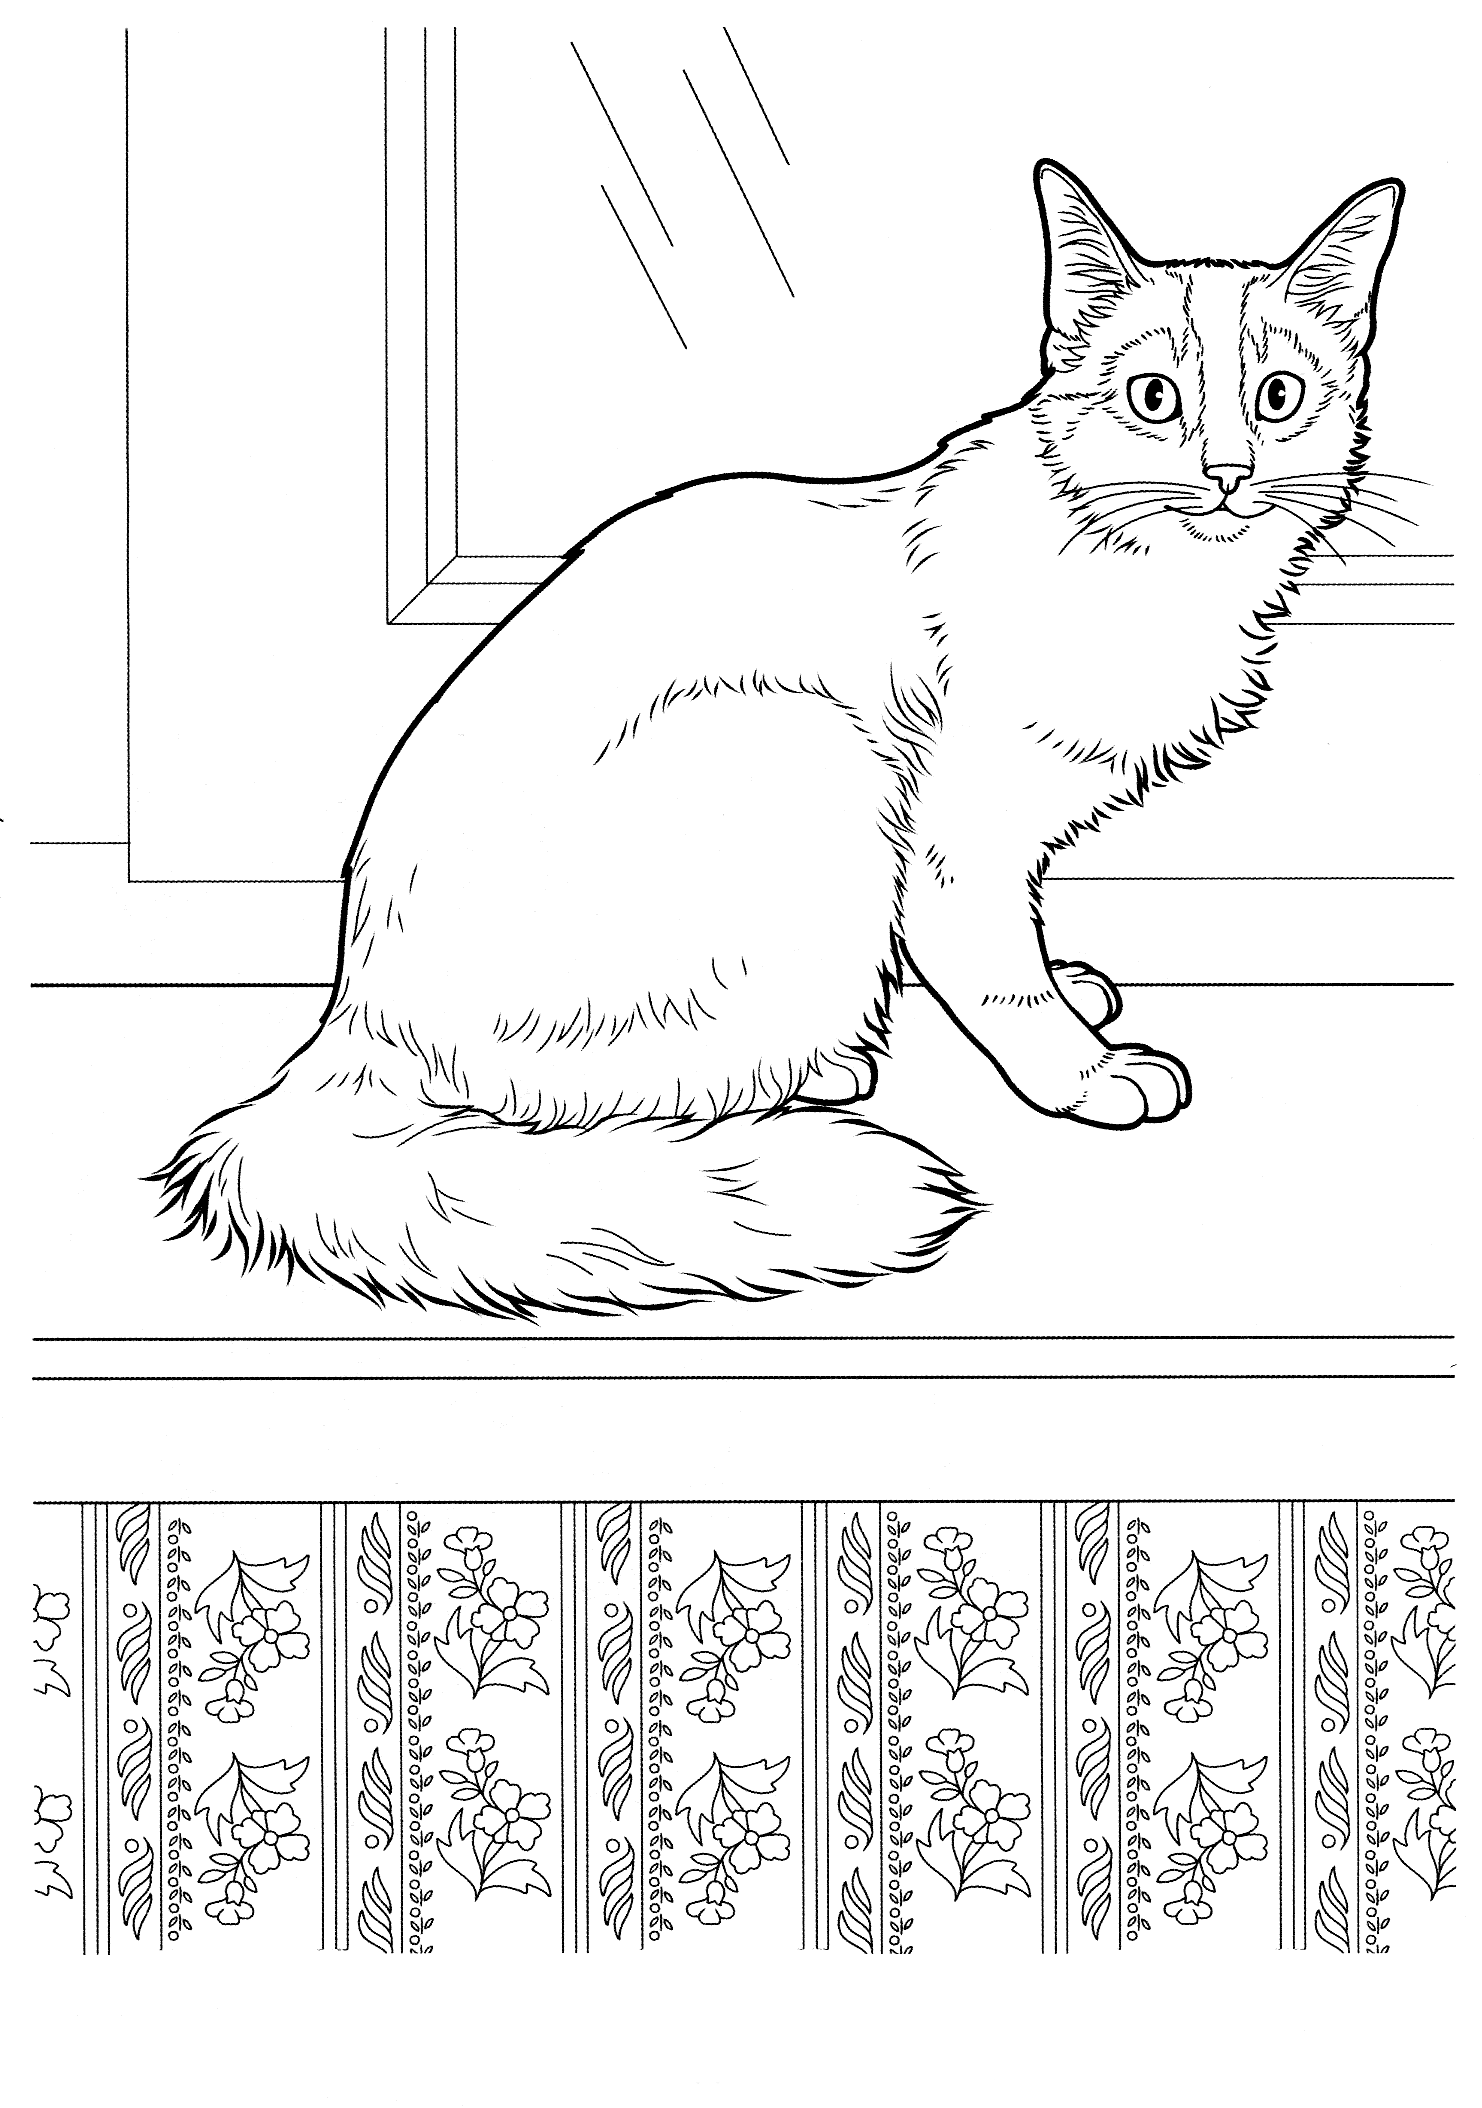 Coloring page - Somali cat